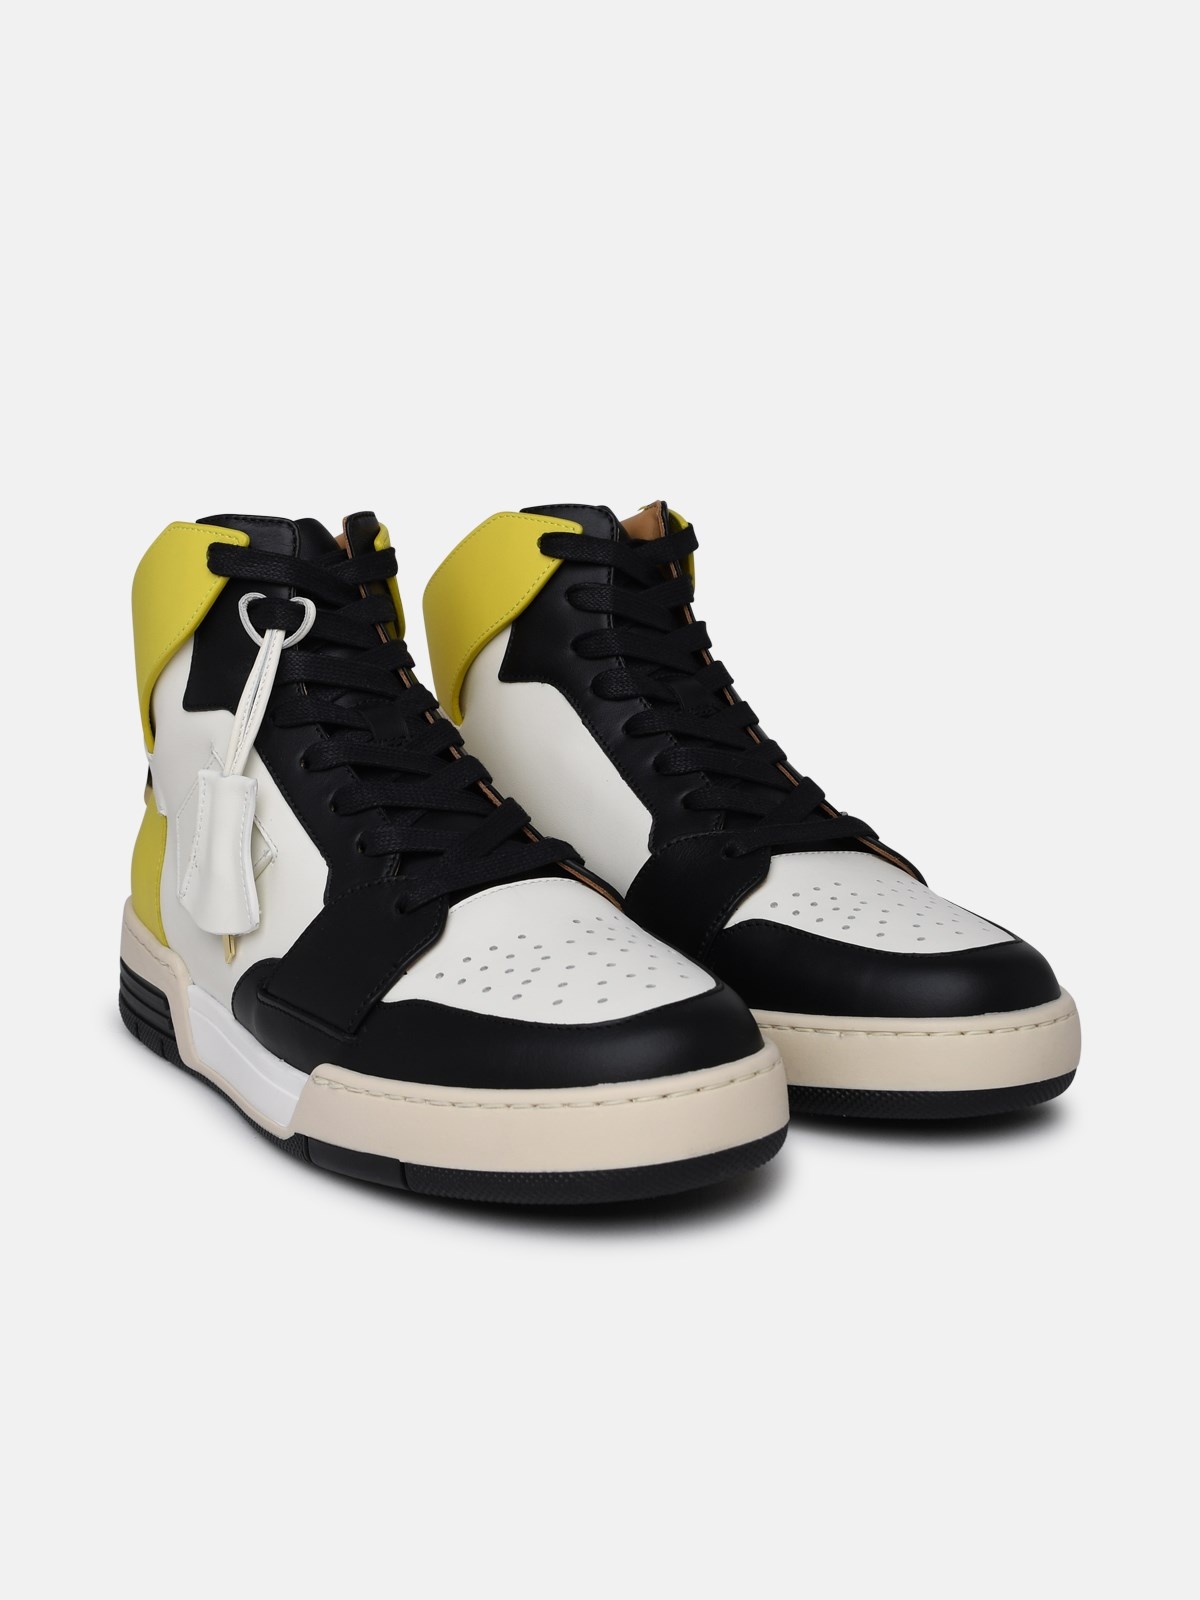 'AIR JON' WHITE AND YELLOW LEATHER SNEAKERS - 2